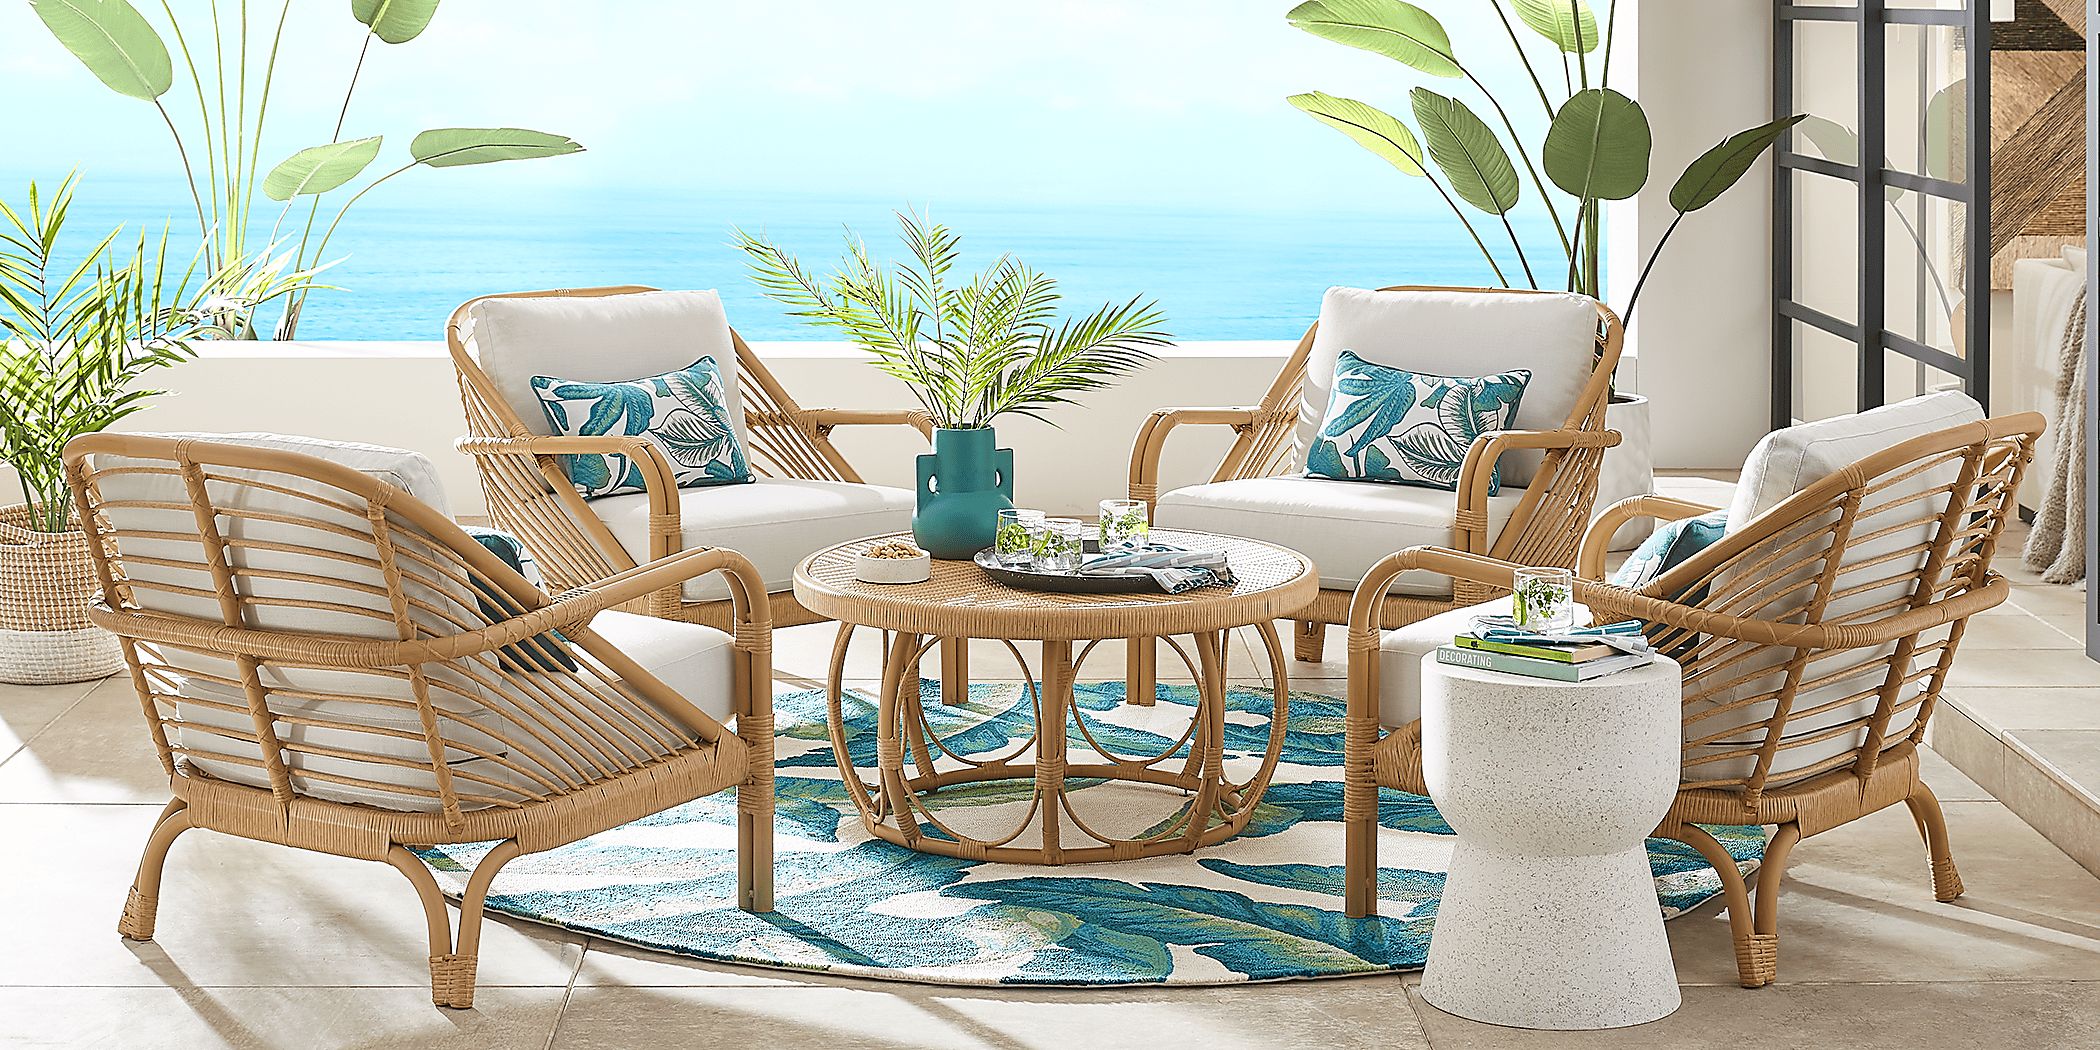 Coronado Sandstone 5 Pc Round Outdoor Chat Seating Set with Vapor Cushions